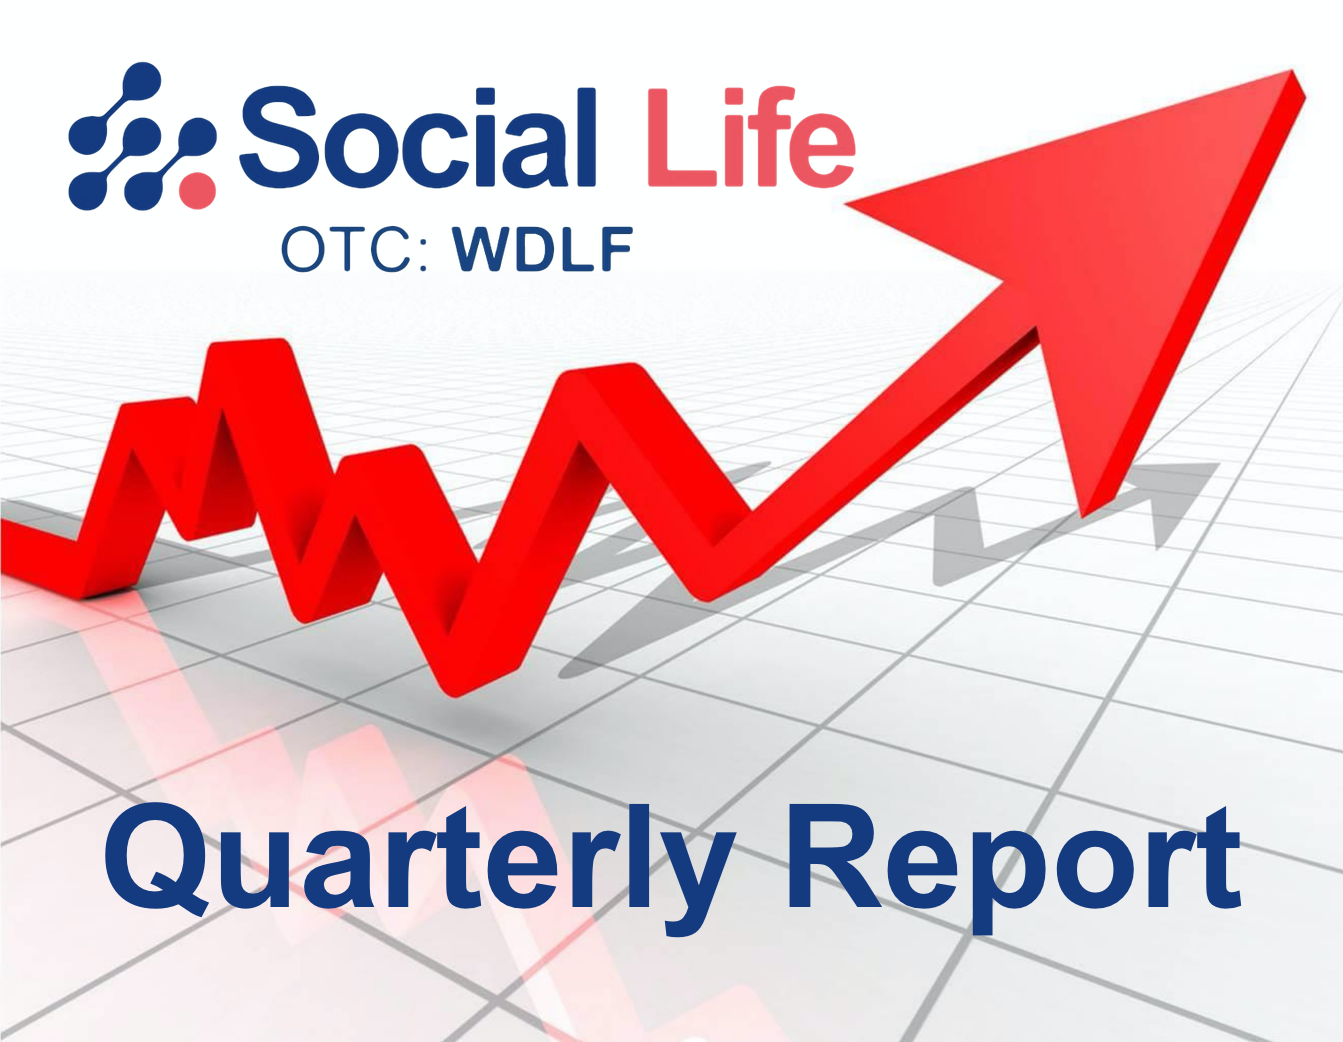 WDLF-Social-Life-Network-10Q-Update-Press-Release.png